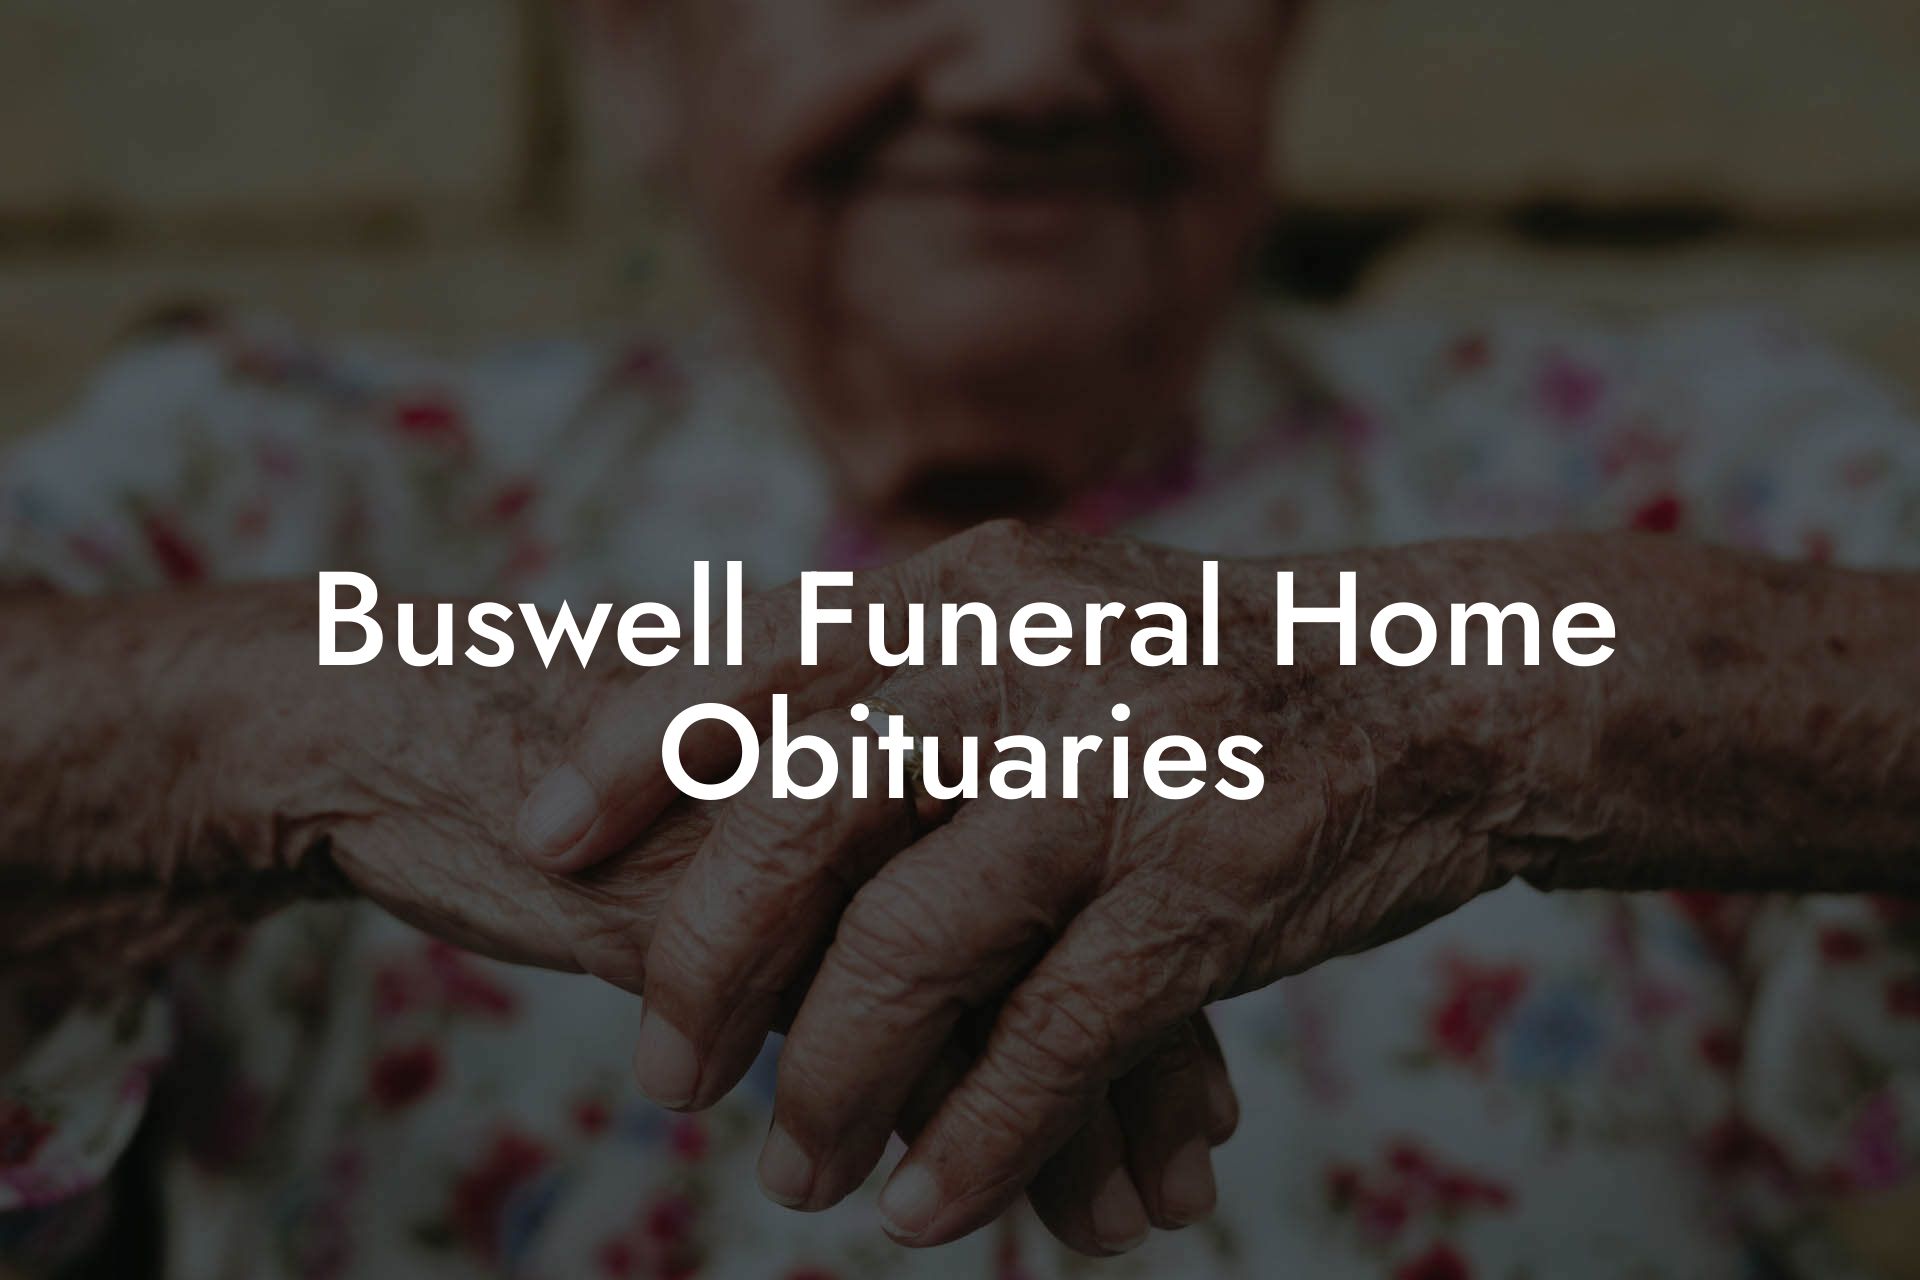 Buswell Funeral Home Obituaries